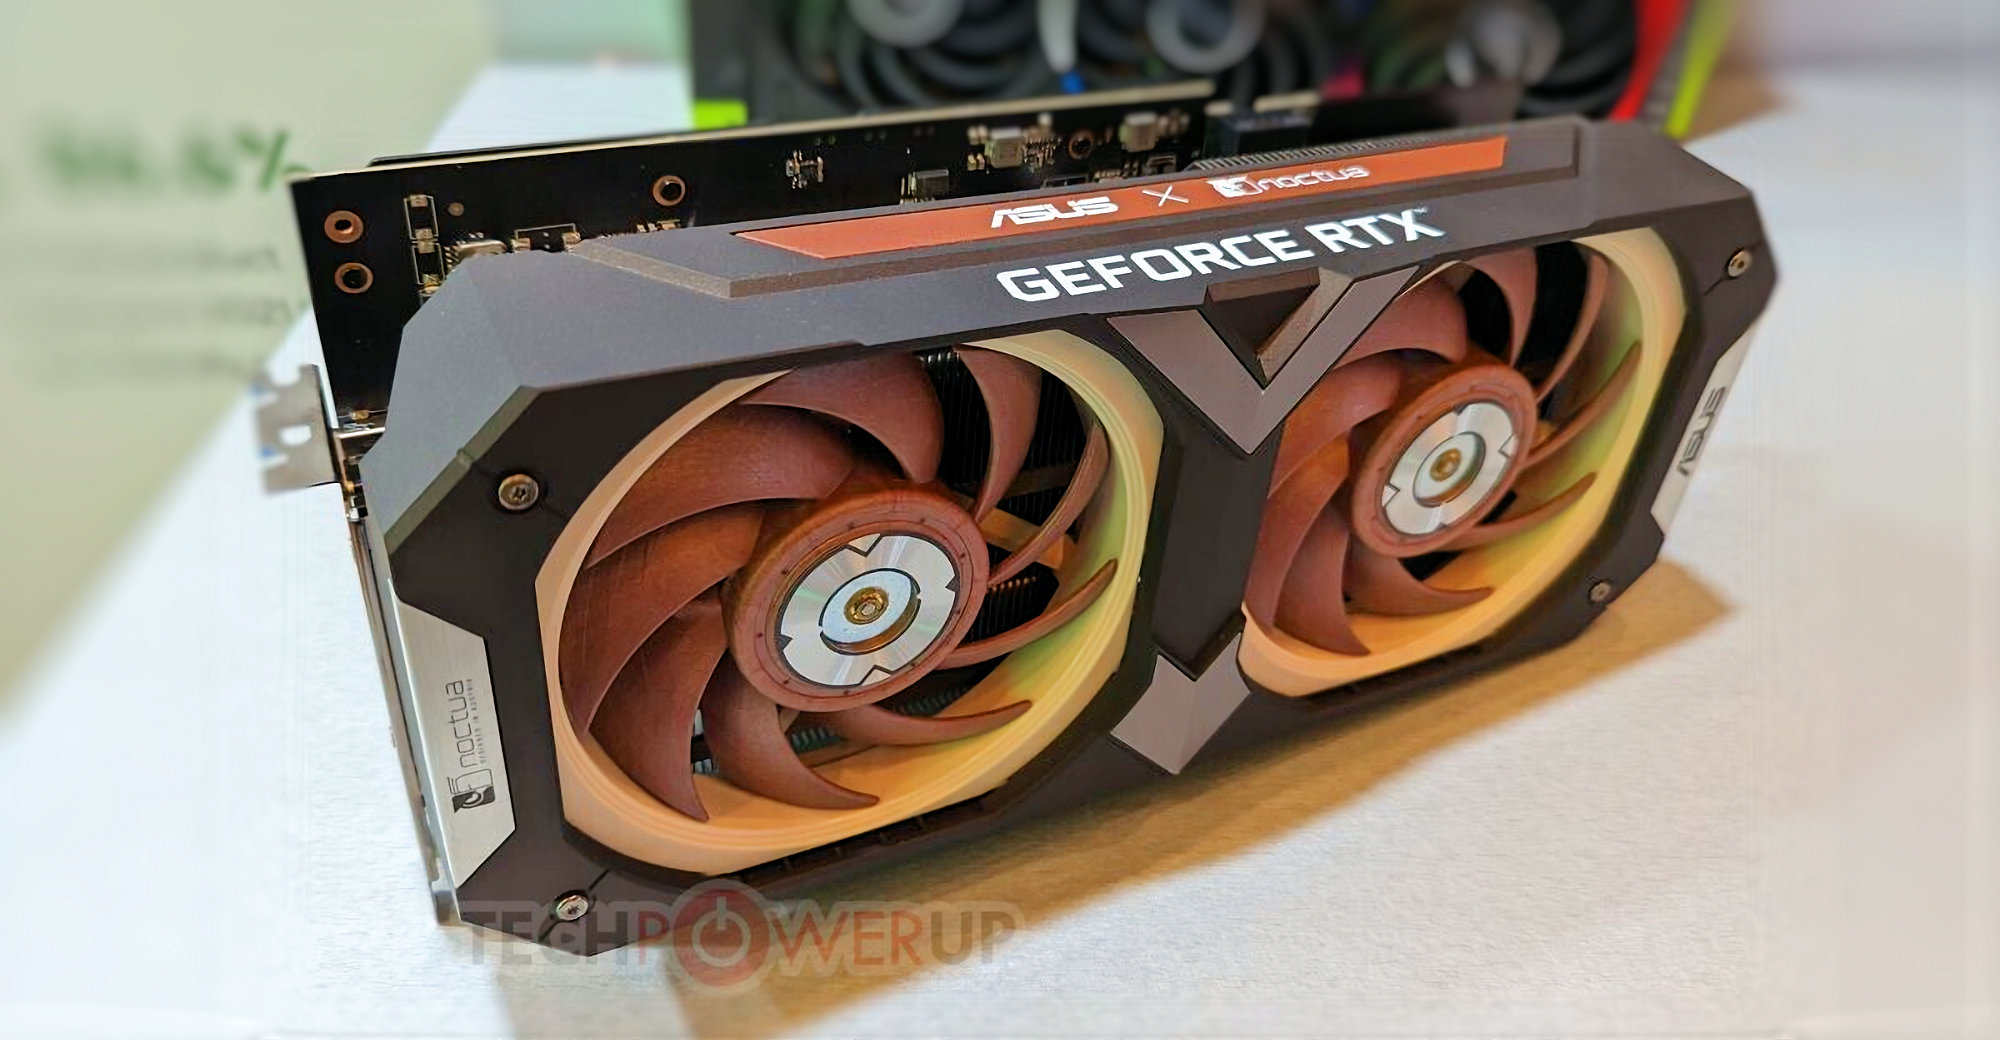 RTX 4080 Noctua Edition is out. Great cooler, what about the coils? 